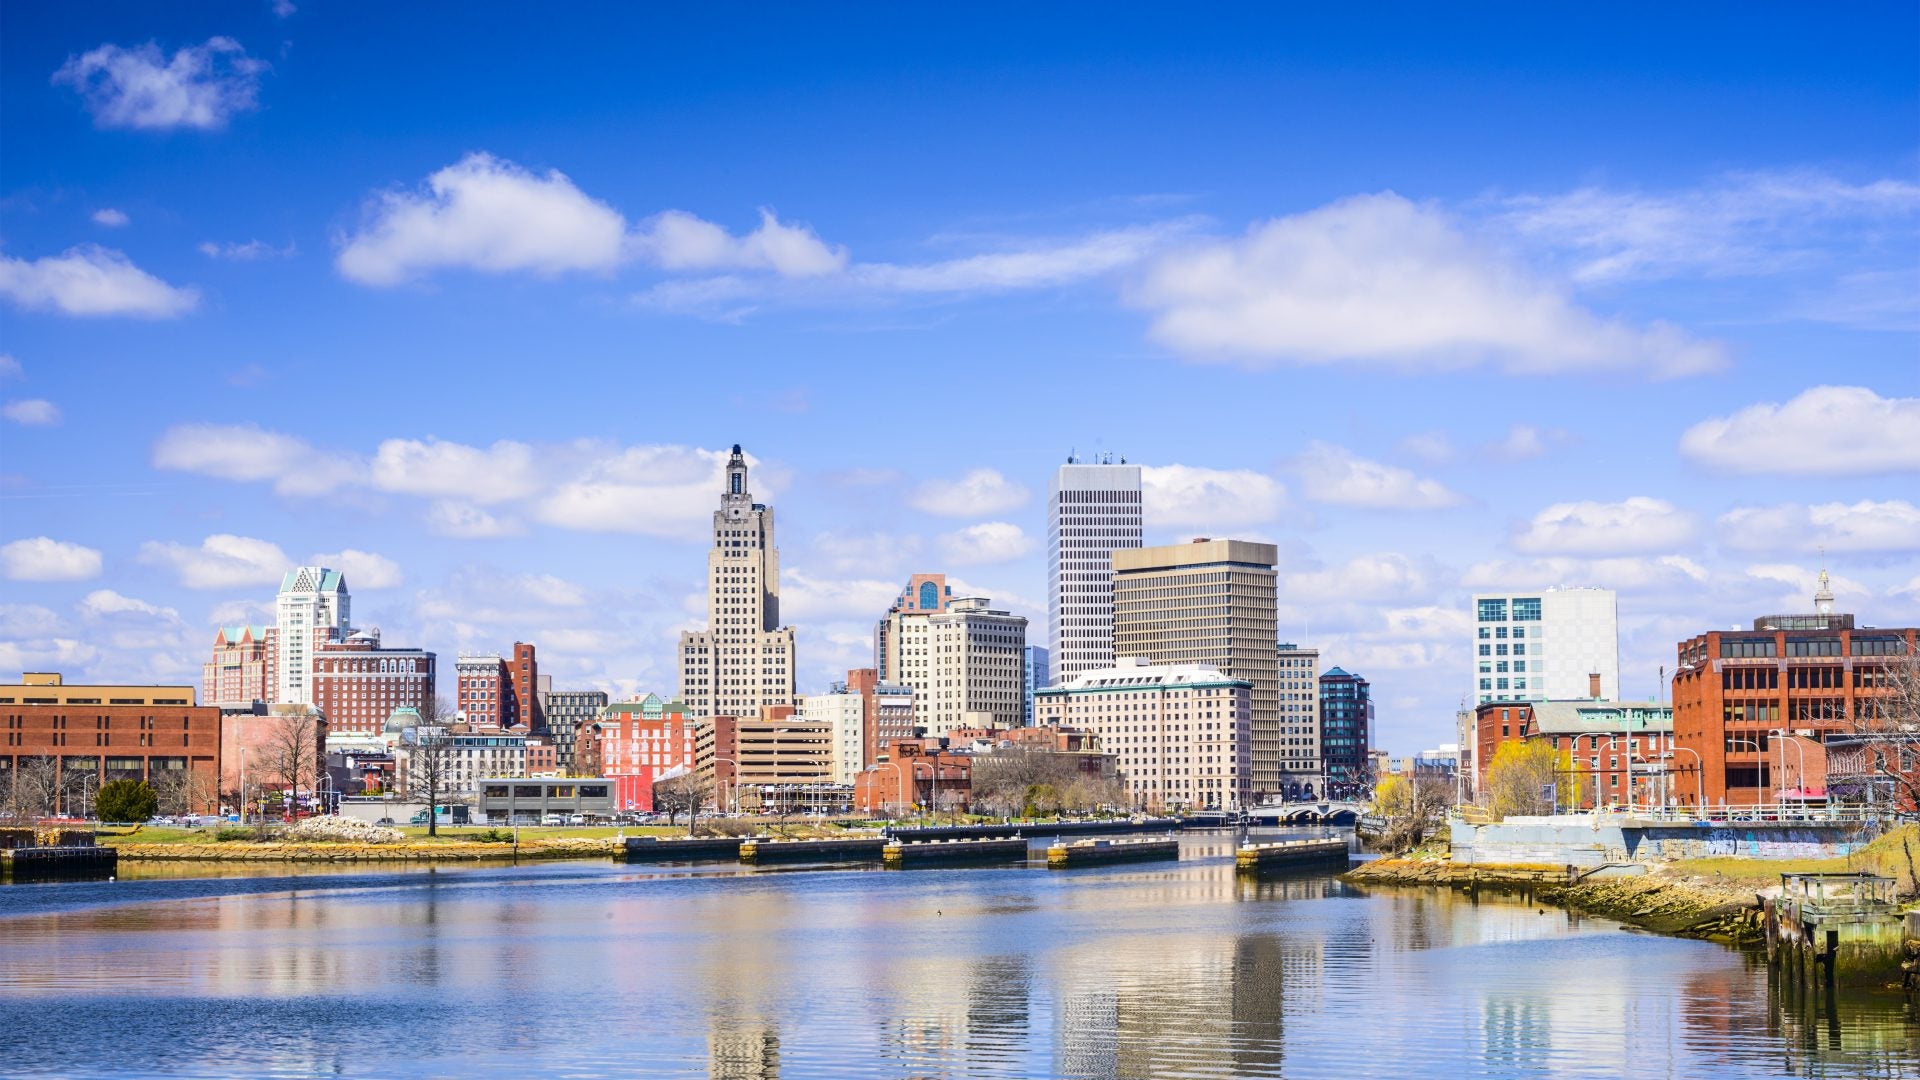 Did You Know That Providence Rhode Island Is Full of Black History & Culture?